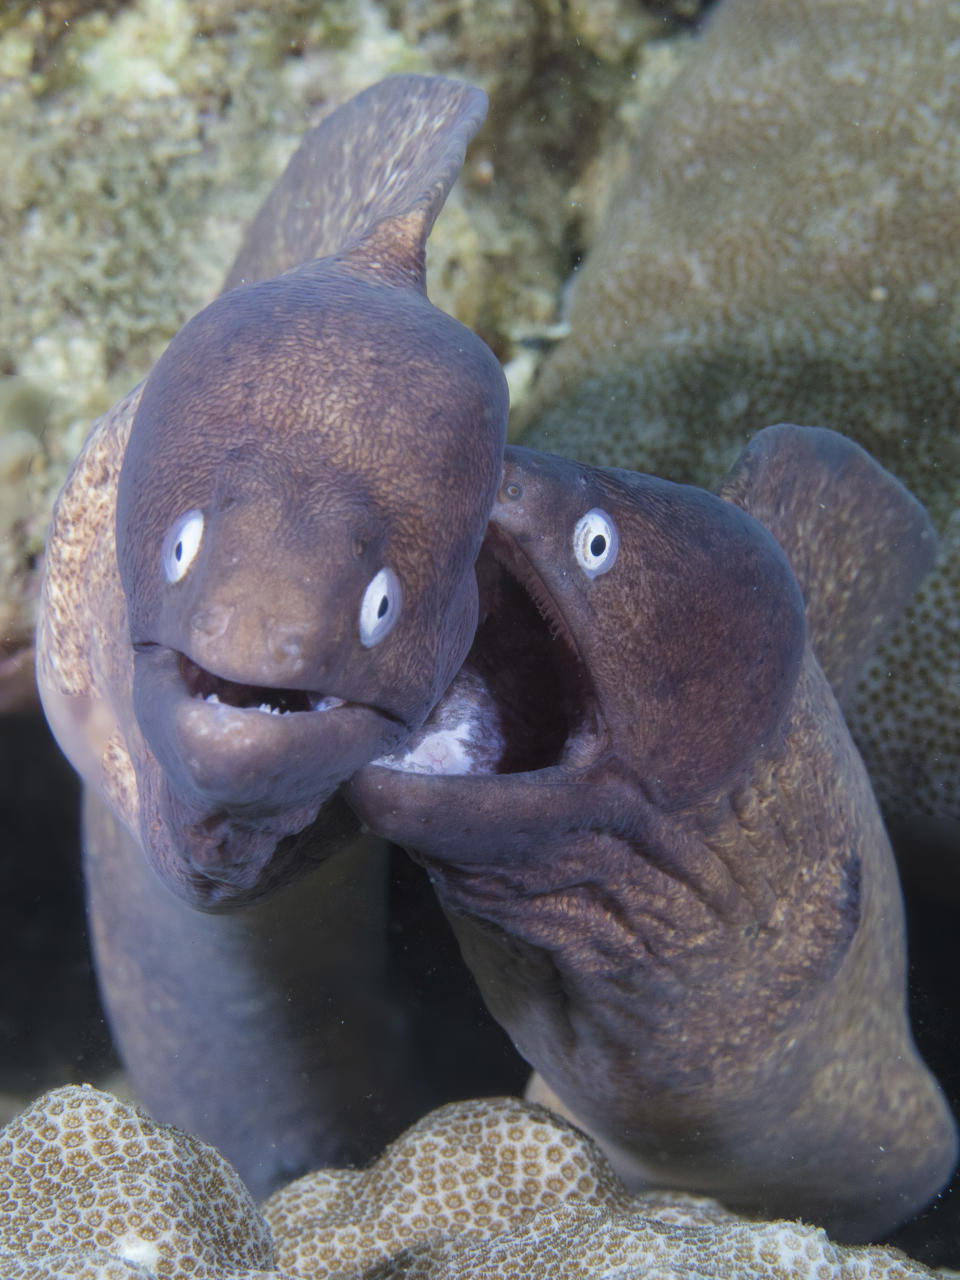 Two white-eyed moray eels